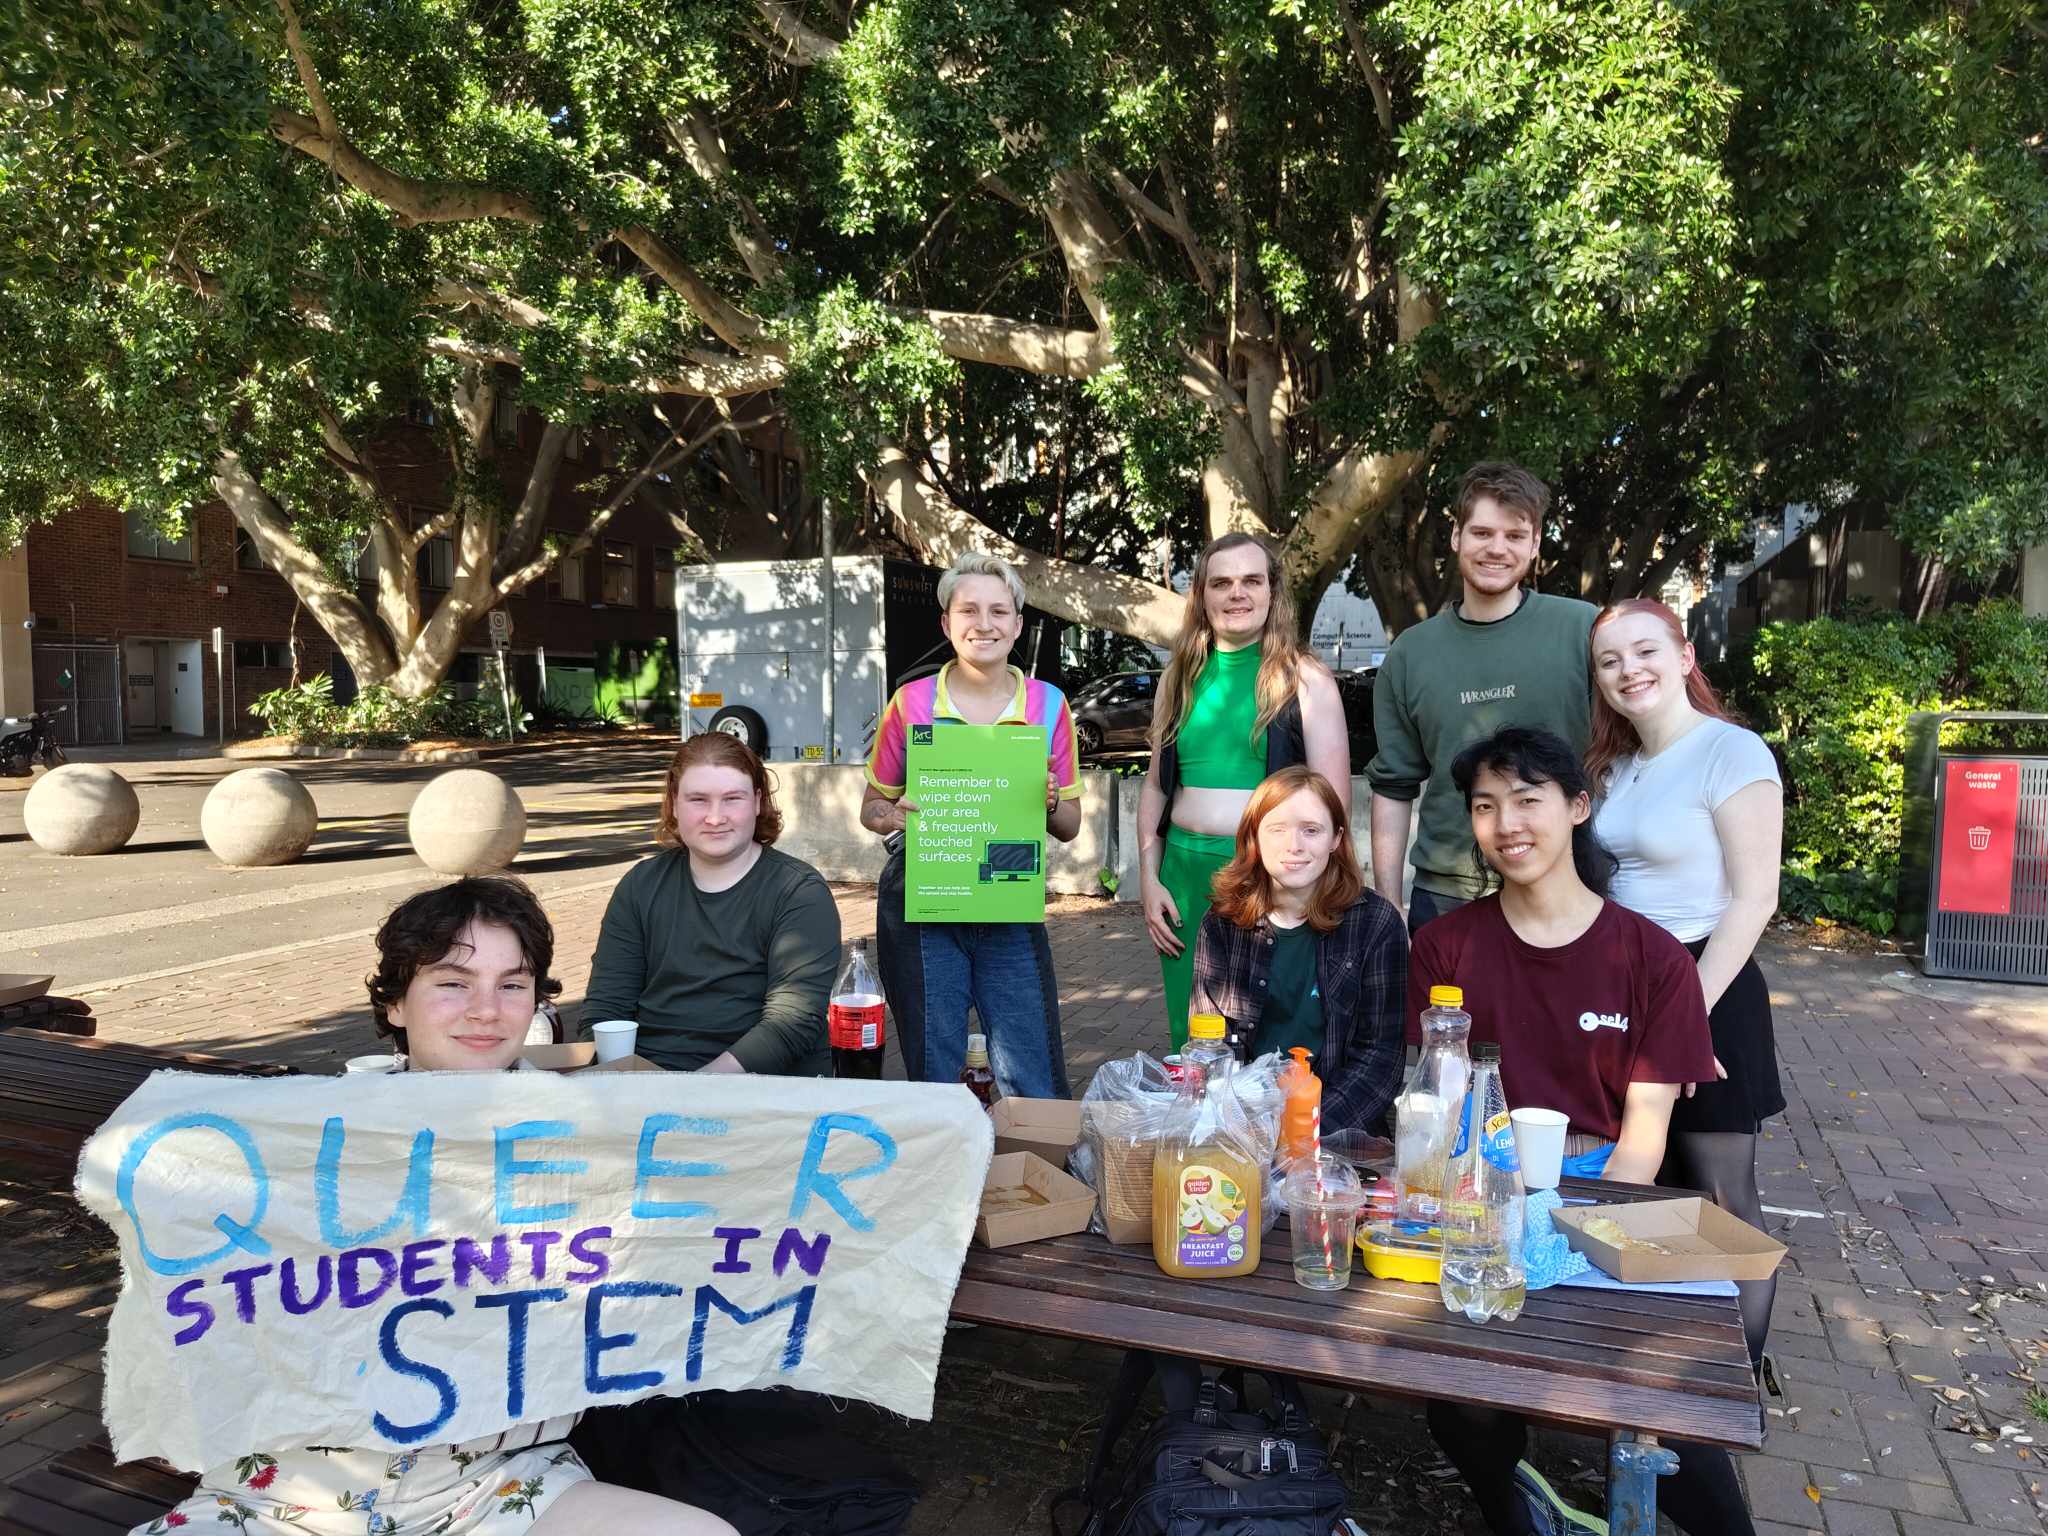 A group of people sit at a picnic table holding a sign that reads Queer Students in STEM